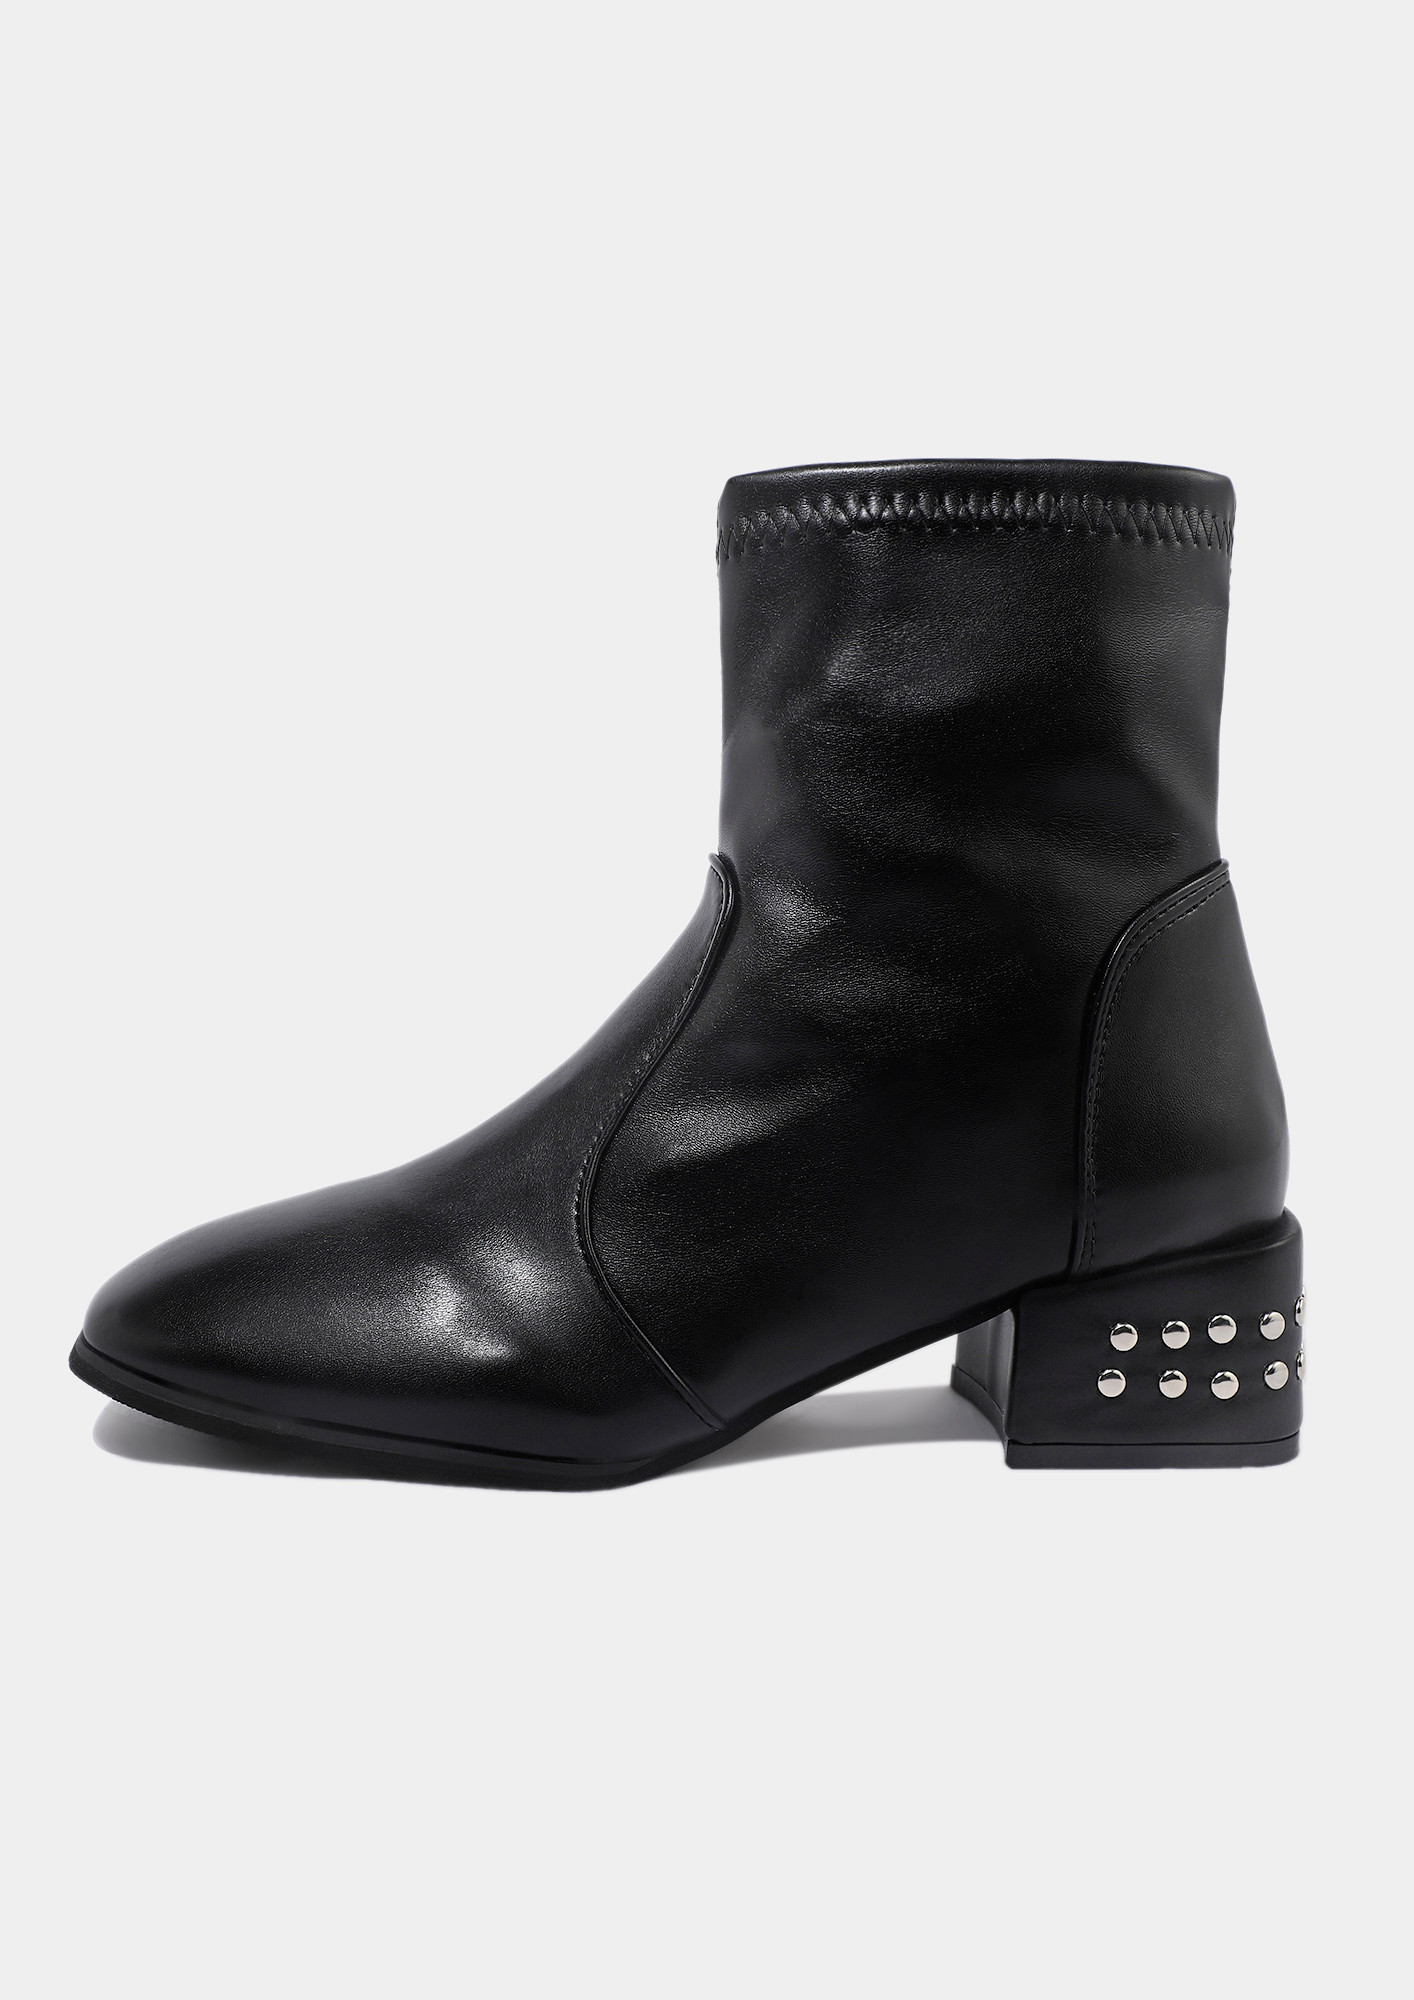 Suede ankle boots with tulle and rhinestones | GIORGIO ARMANI Woman